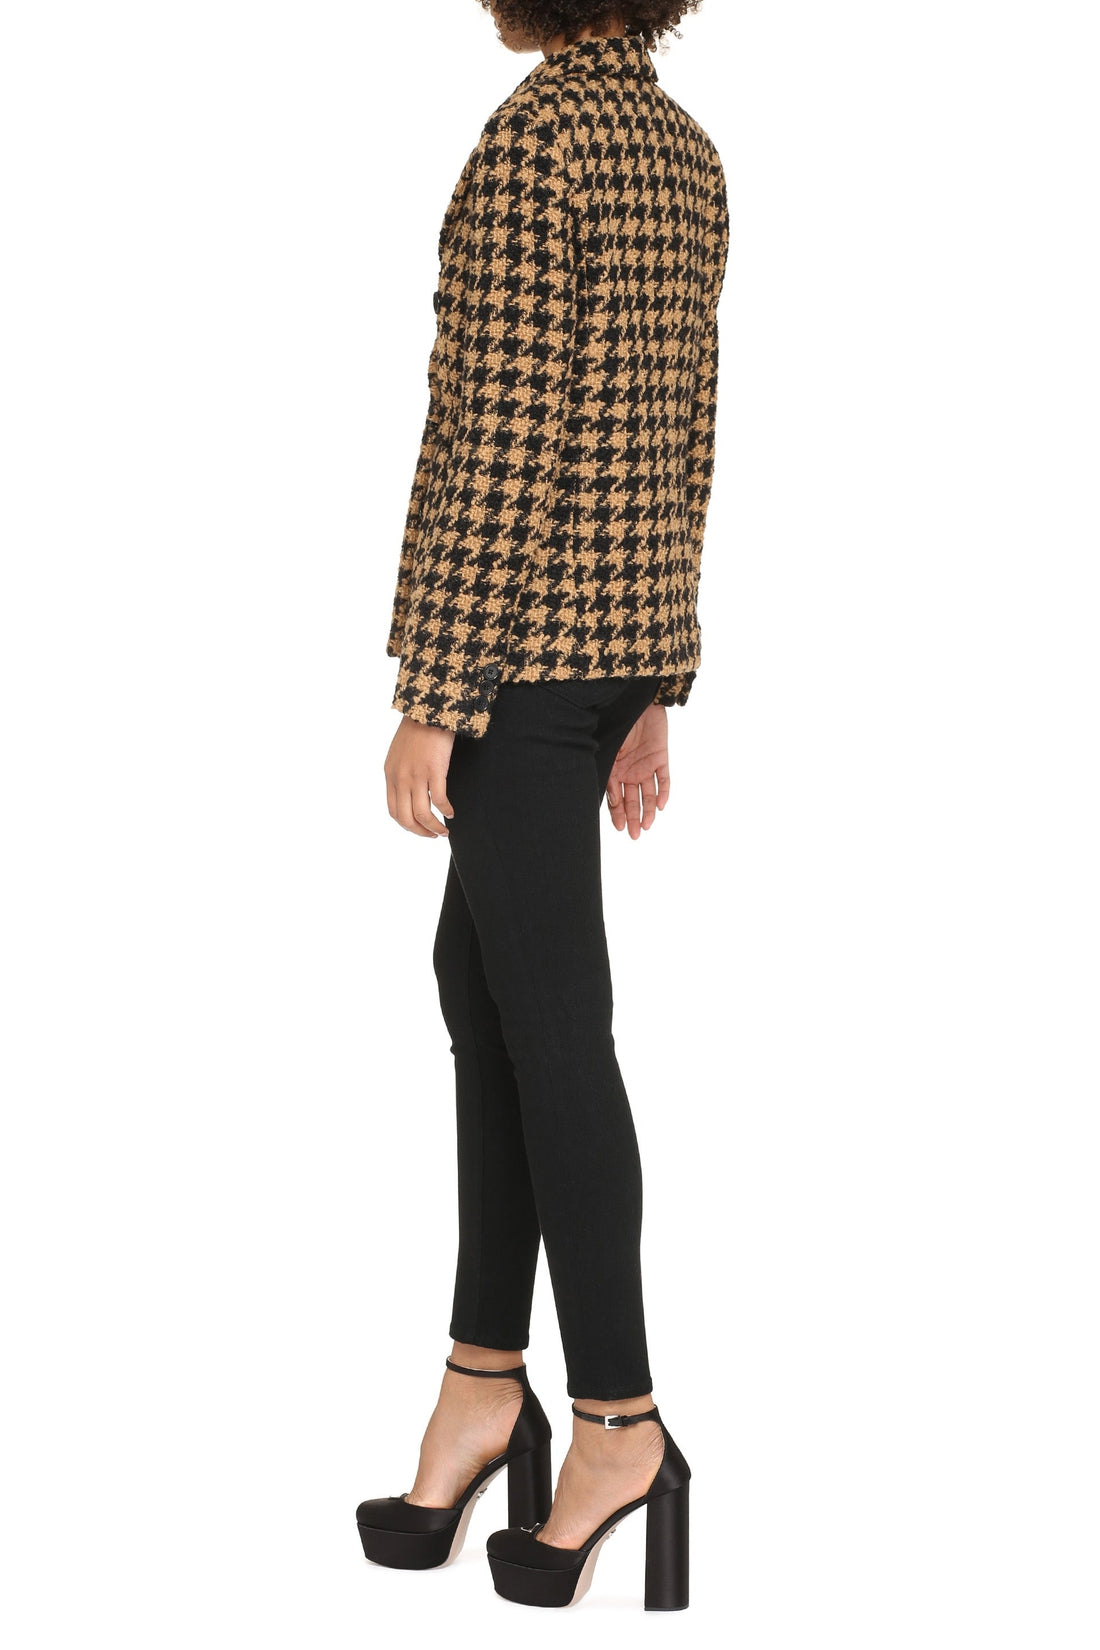 MSGM-OUTLET-SALE-Houndstooth double breast blazer-ARCHIVIST